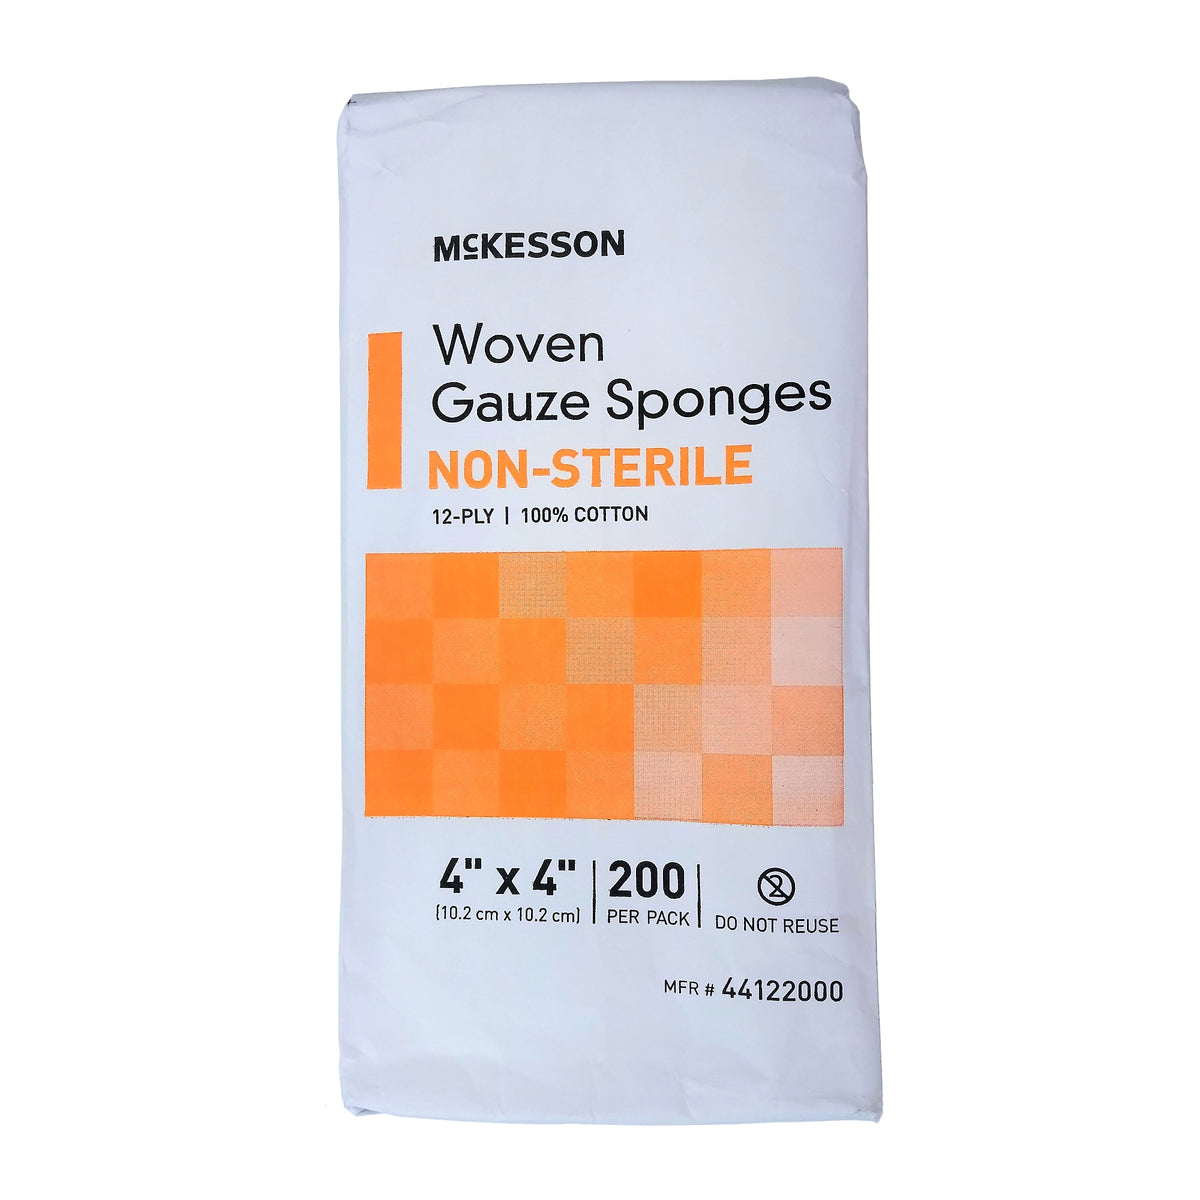 Mckesson Woven Gauze Sponges Non-Sterile 4x4 200 Pack, #44122000, By –  CommonFinds